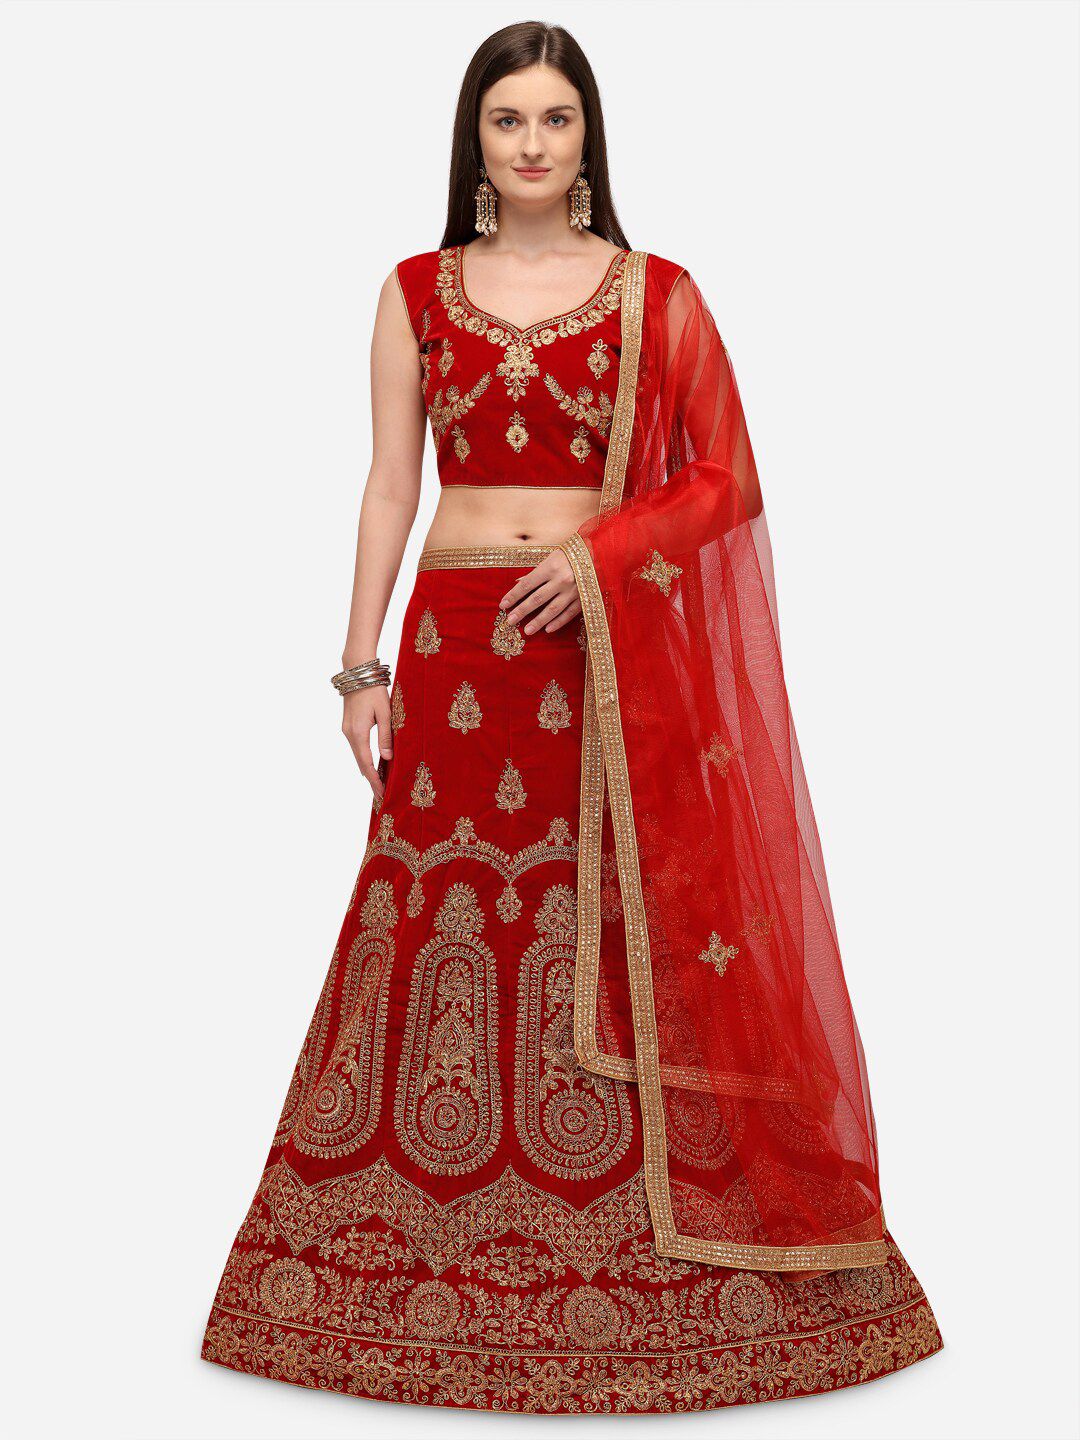 Rajesh Silk Mills Red Embroidered Semi-Stitched Lehenga & Unstitched Blouse With Dupatta Price in India